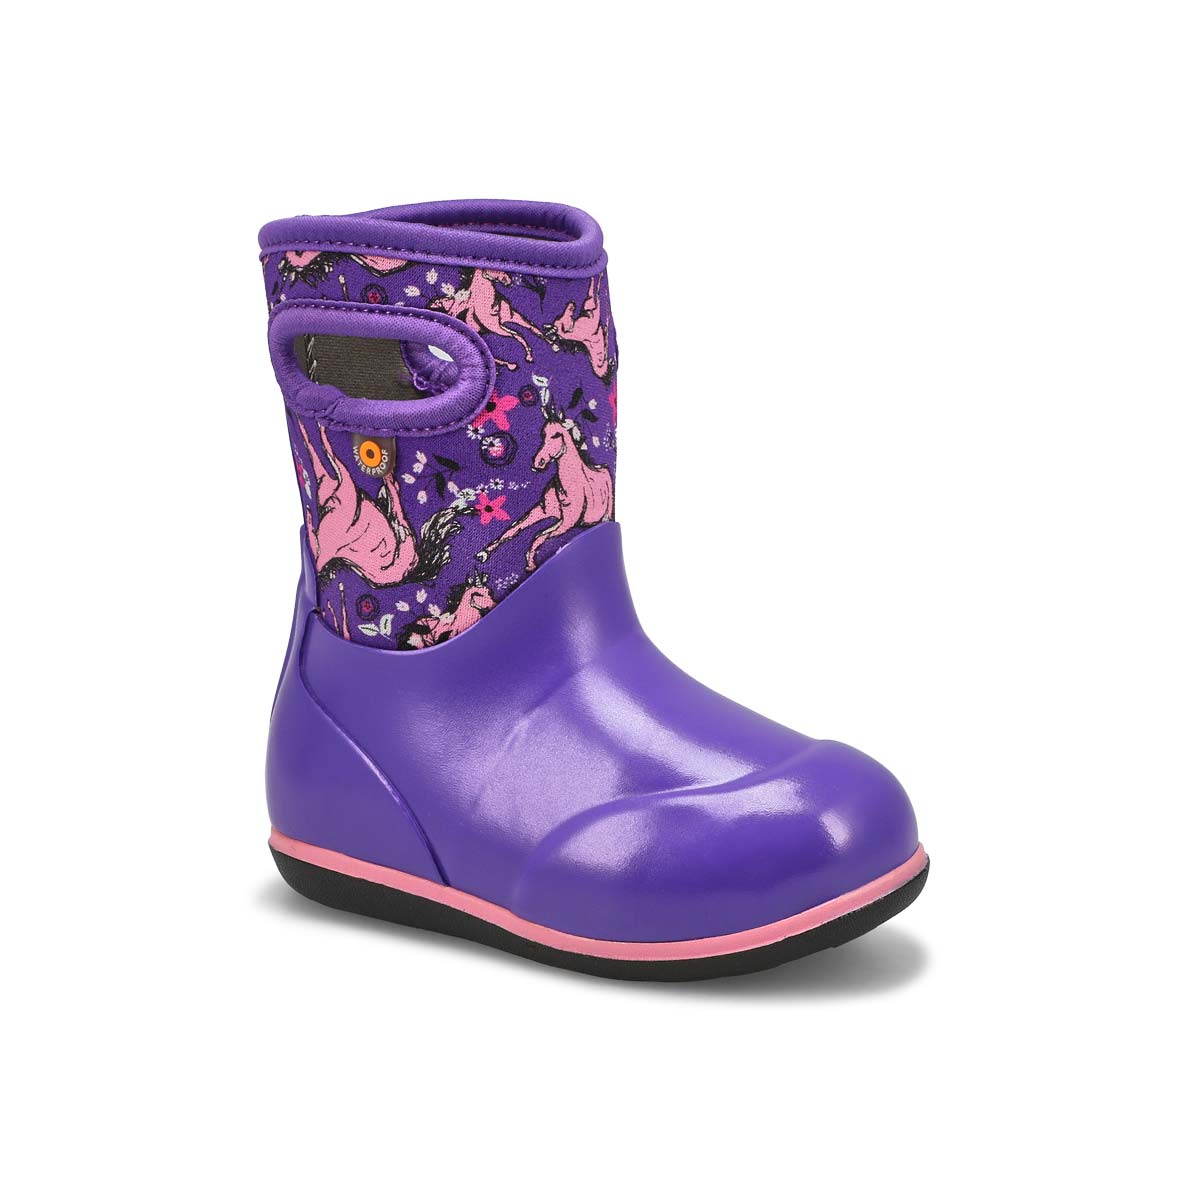 Infants' Classic Unicorn Awesome Boot - Violet